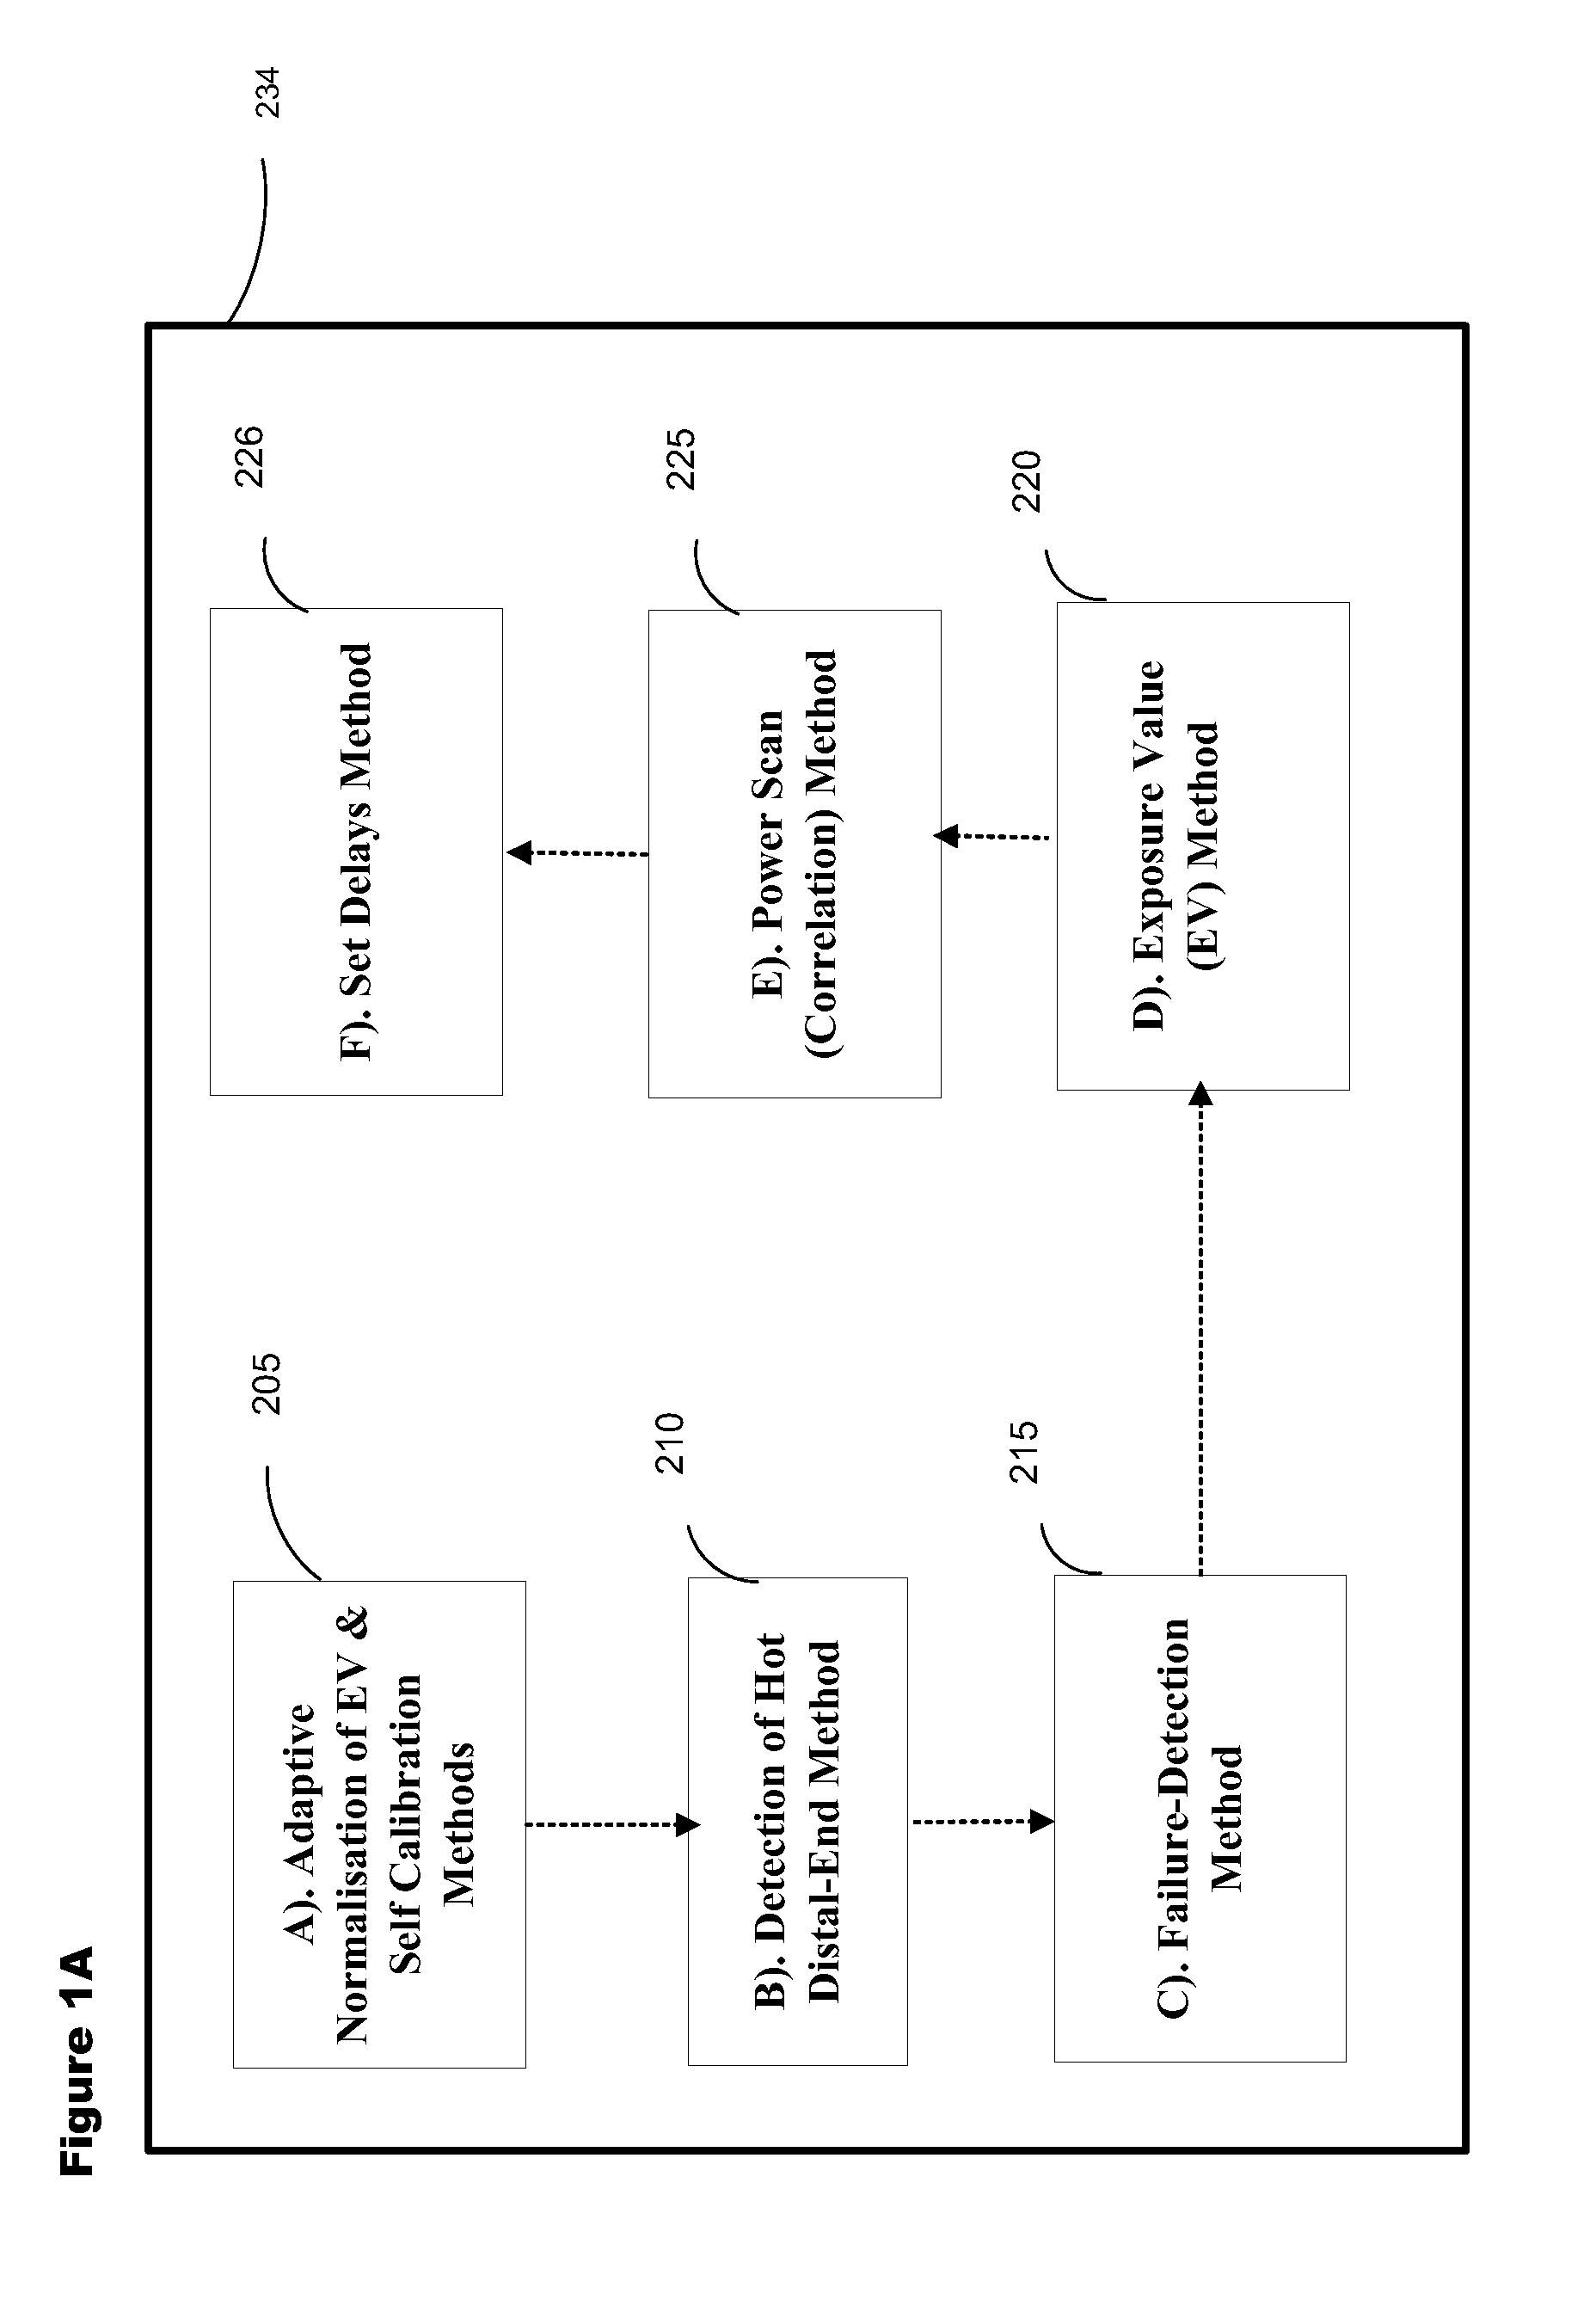 Method and Apparatus for Protection from High Intensity Light